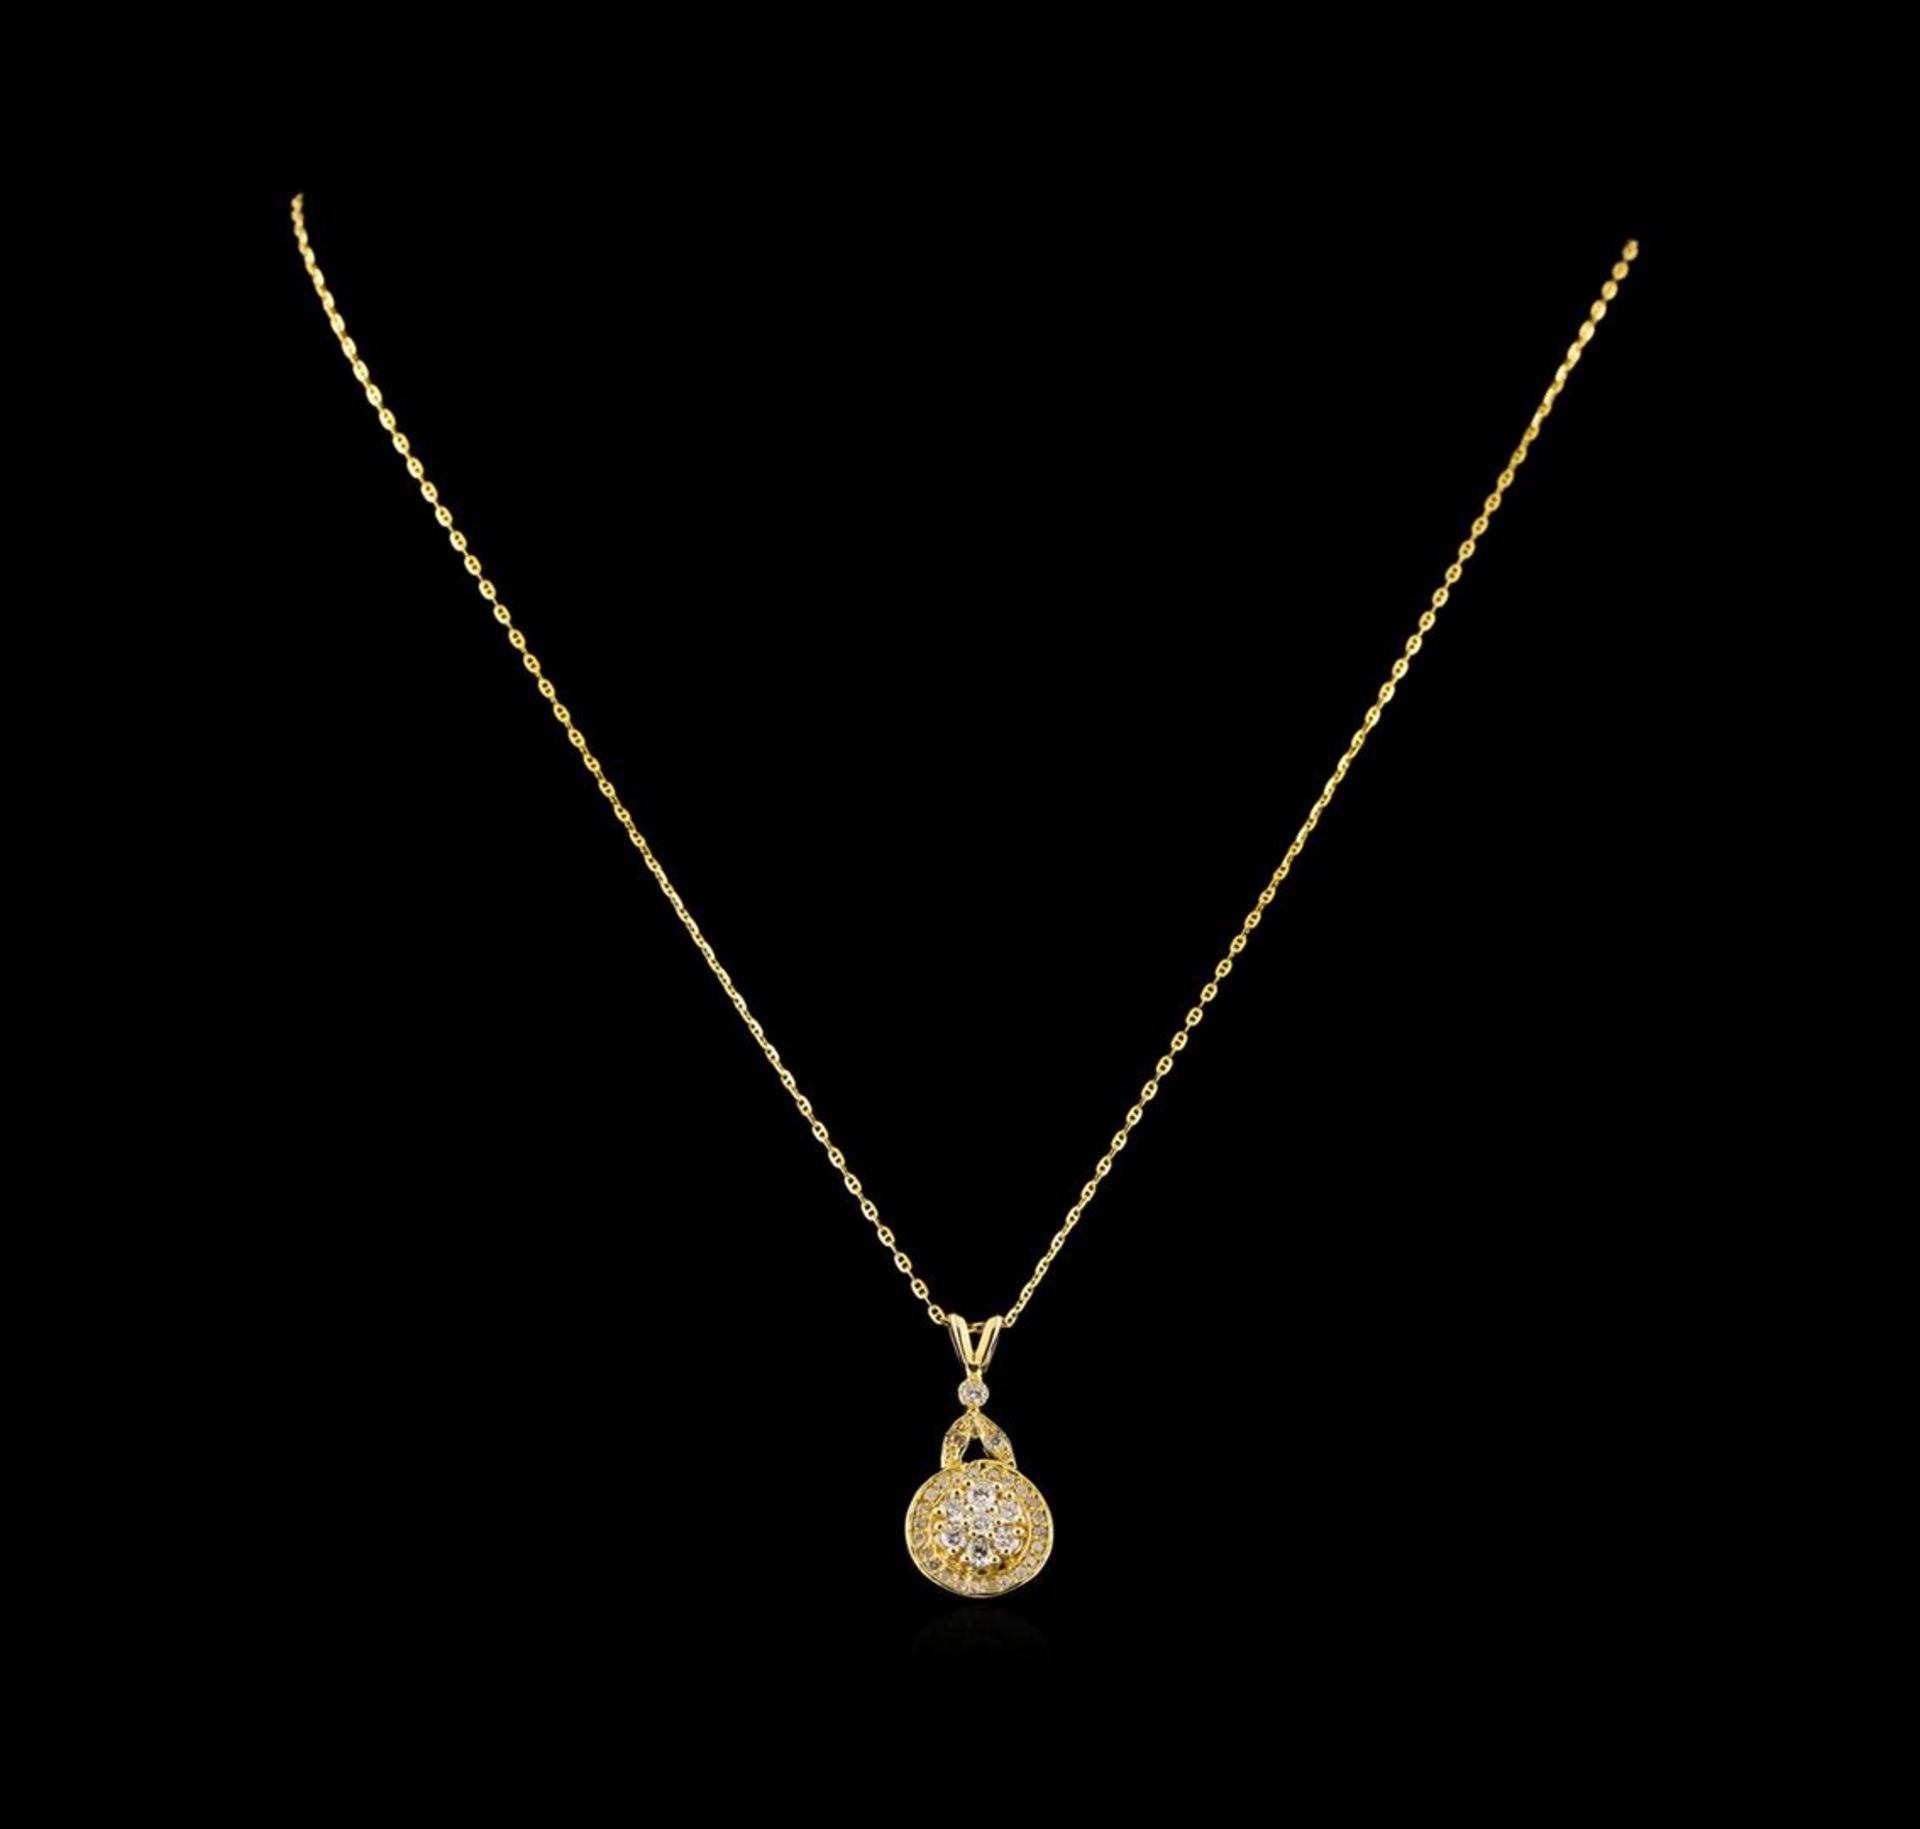 14KT Yellow Gold 0.37 ctw Diamond Pendant With Chain - Image 2 of 4